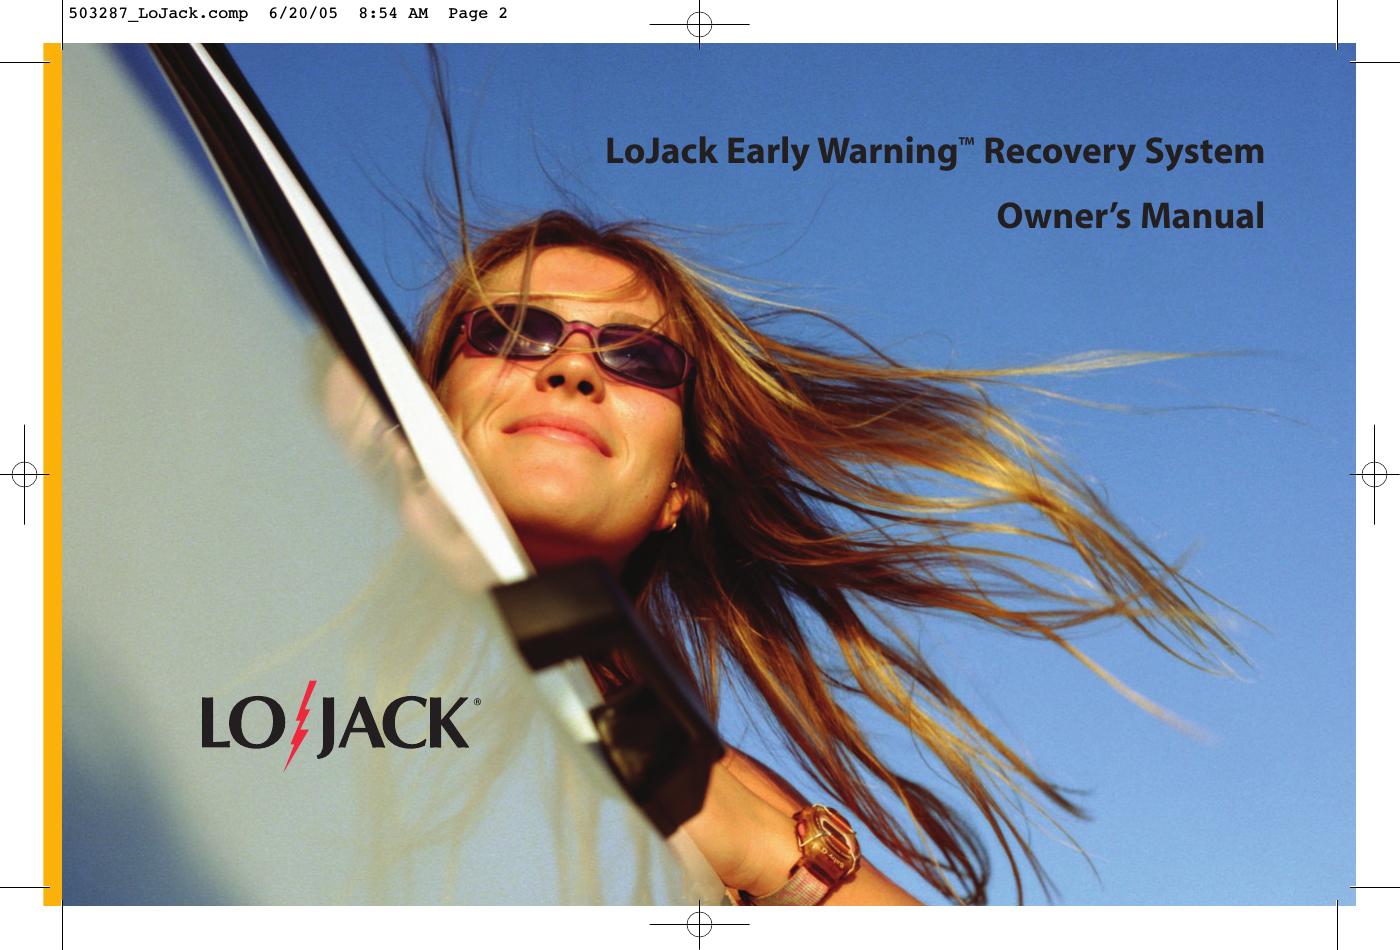 LoJack Early Warning™Recovery System Owner’s Manual503287_LoJack.comp  6/20/05  8:54 AM  Page 2